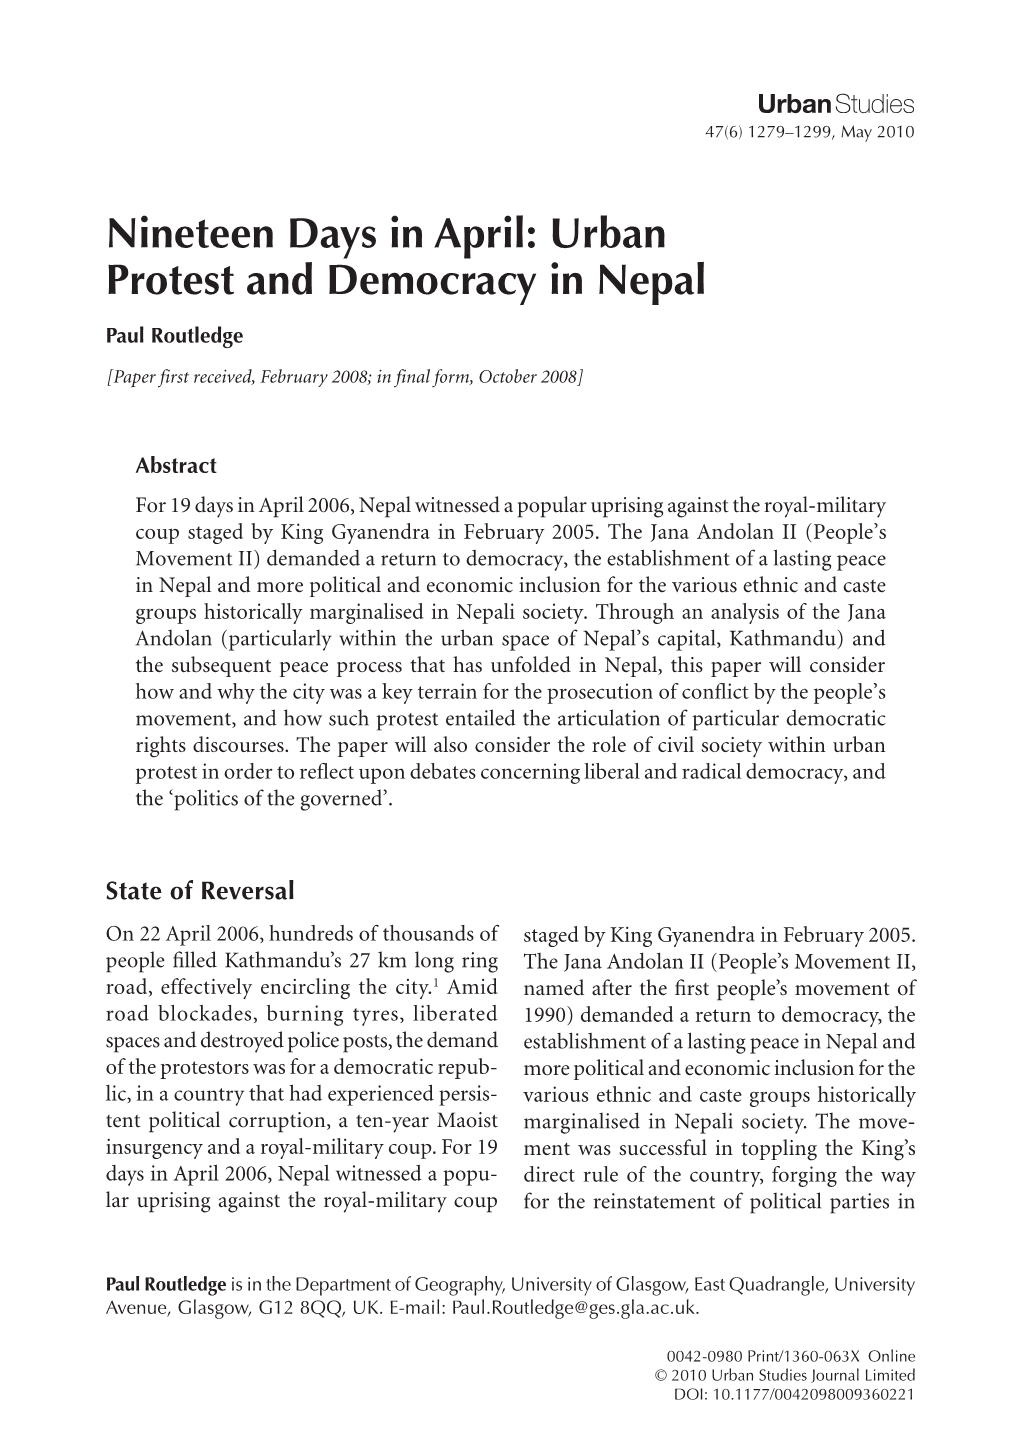 Nineteen Days in April: Urban Protest and Democracy in Nepal